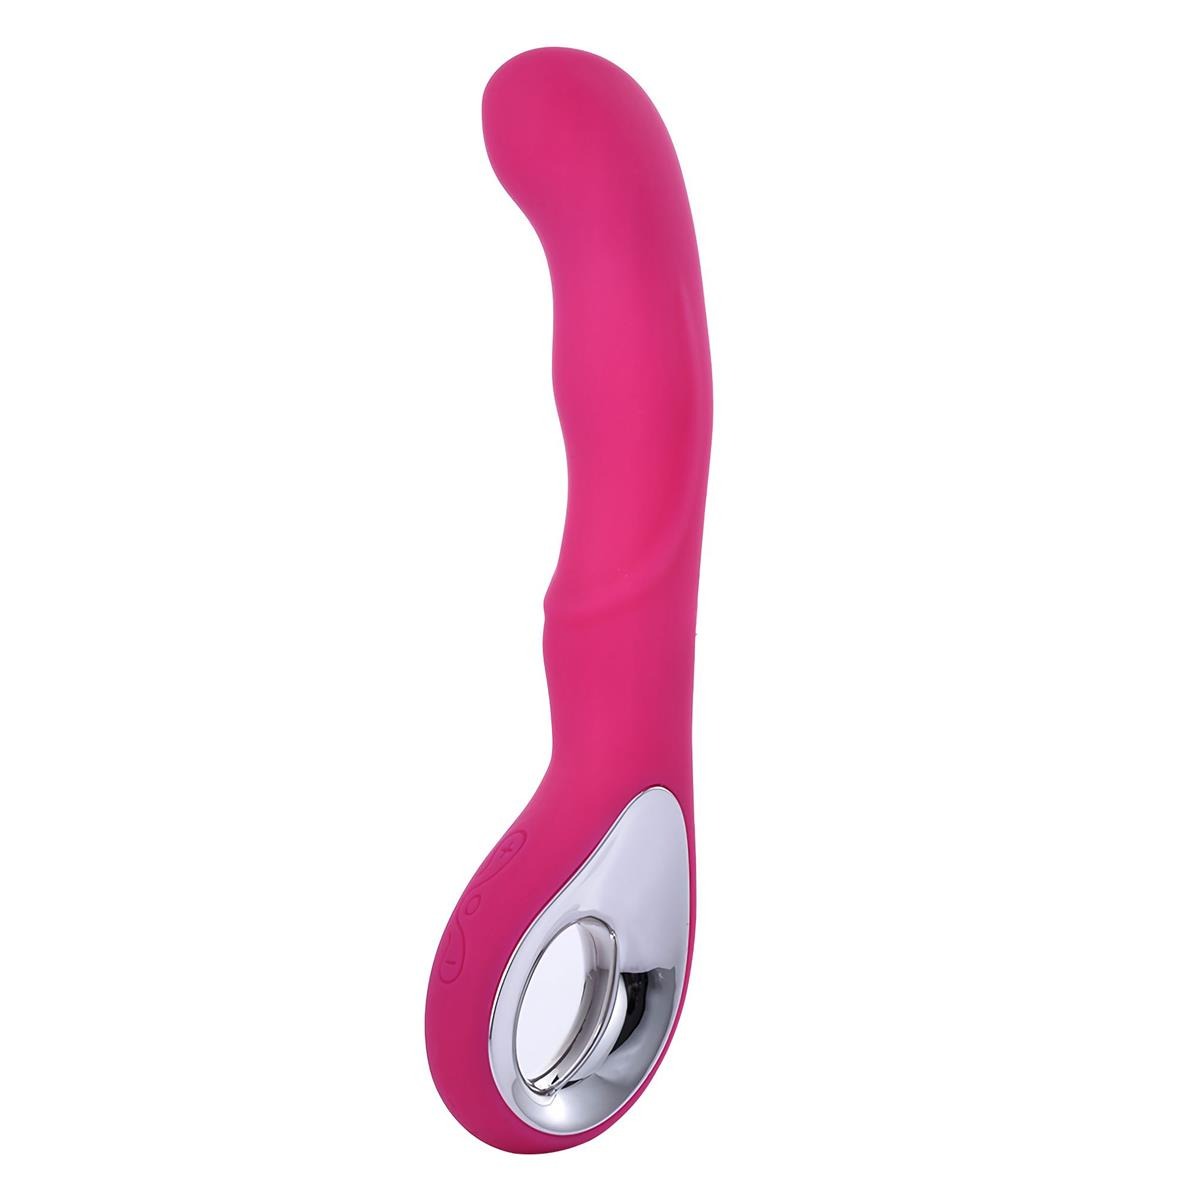 Bossoftoys - 26-00054  - Vibrator G-spot - 10 functions - USB - Pink -  100% waterproof - Rechargeable